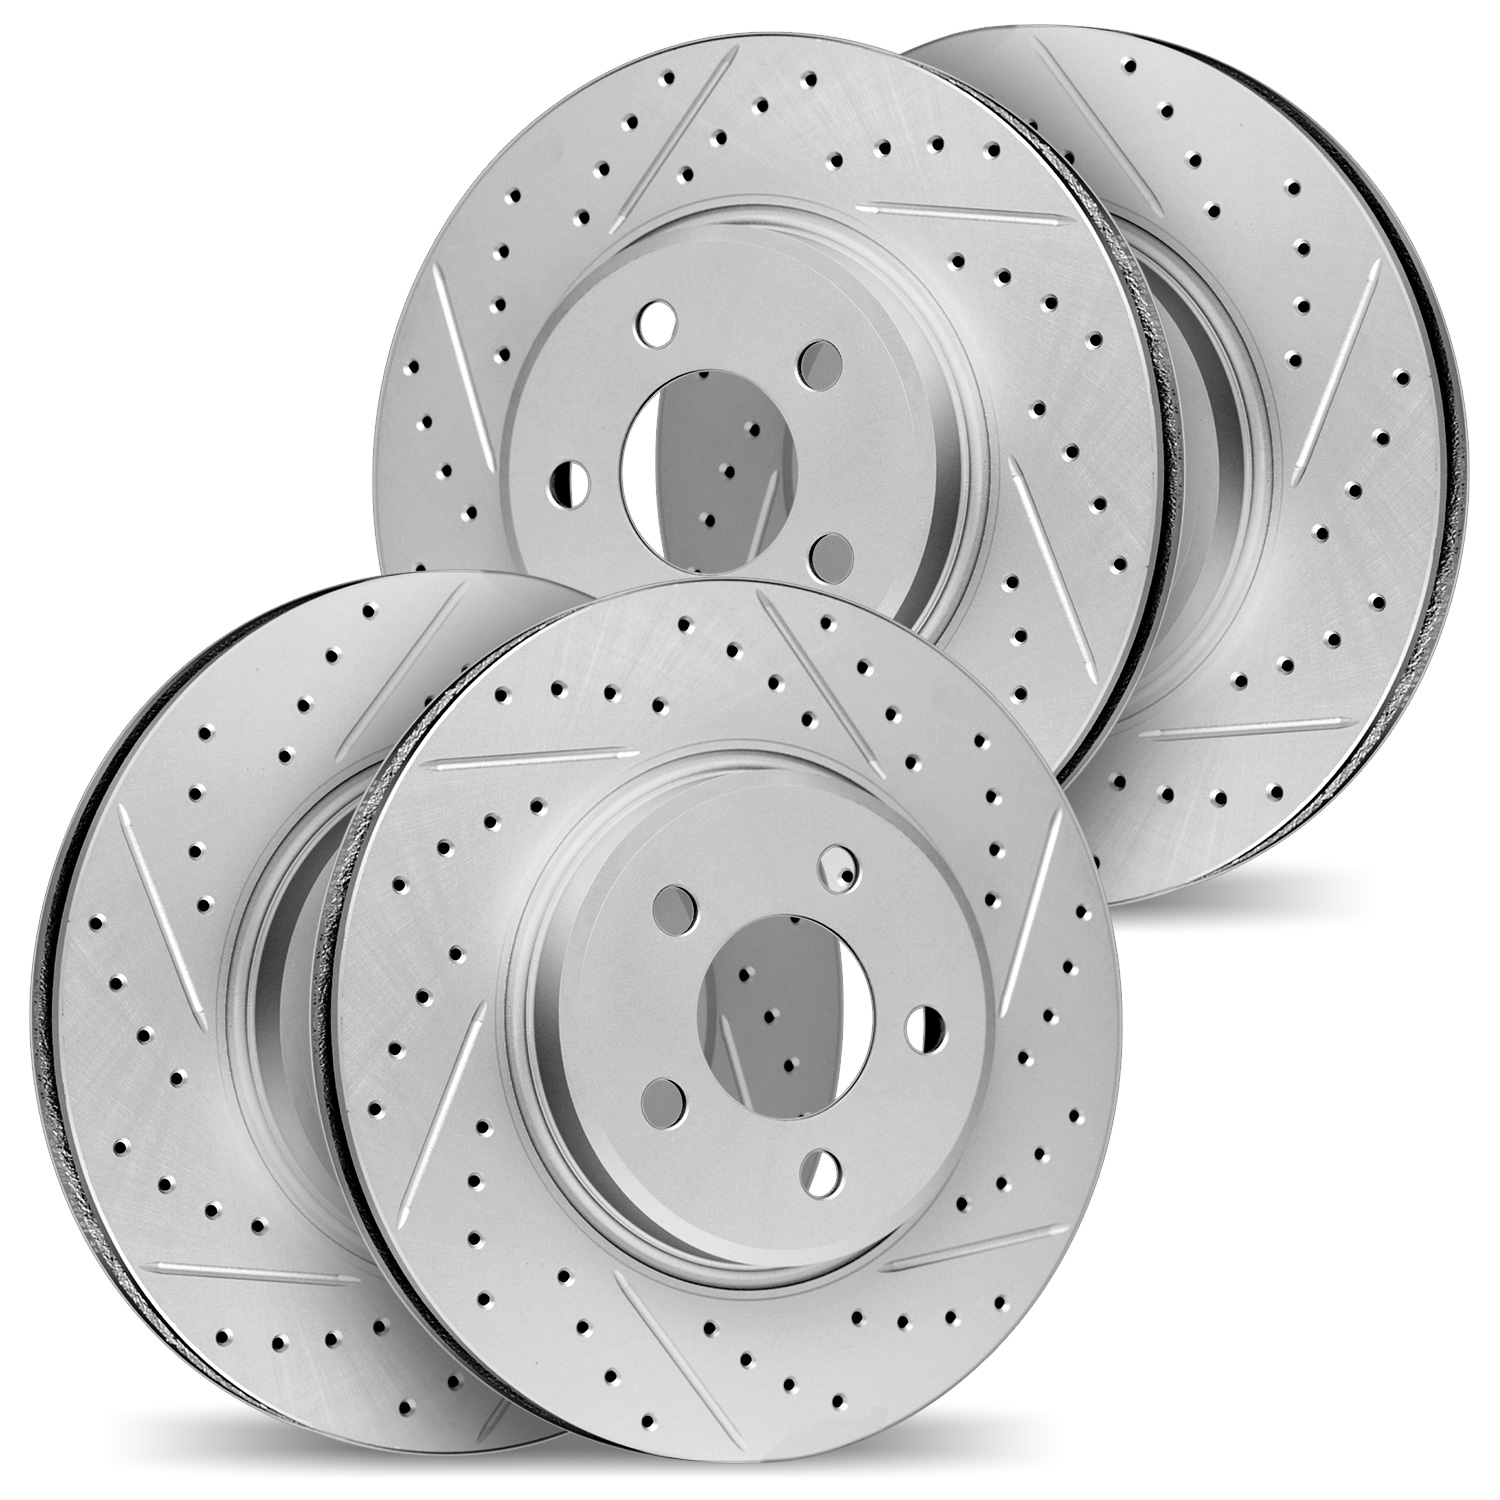 2004-46009 Geoperformance Drilled/Slotted Brake Rotors, 2003-2007 GM, Position: Front and Rear